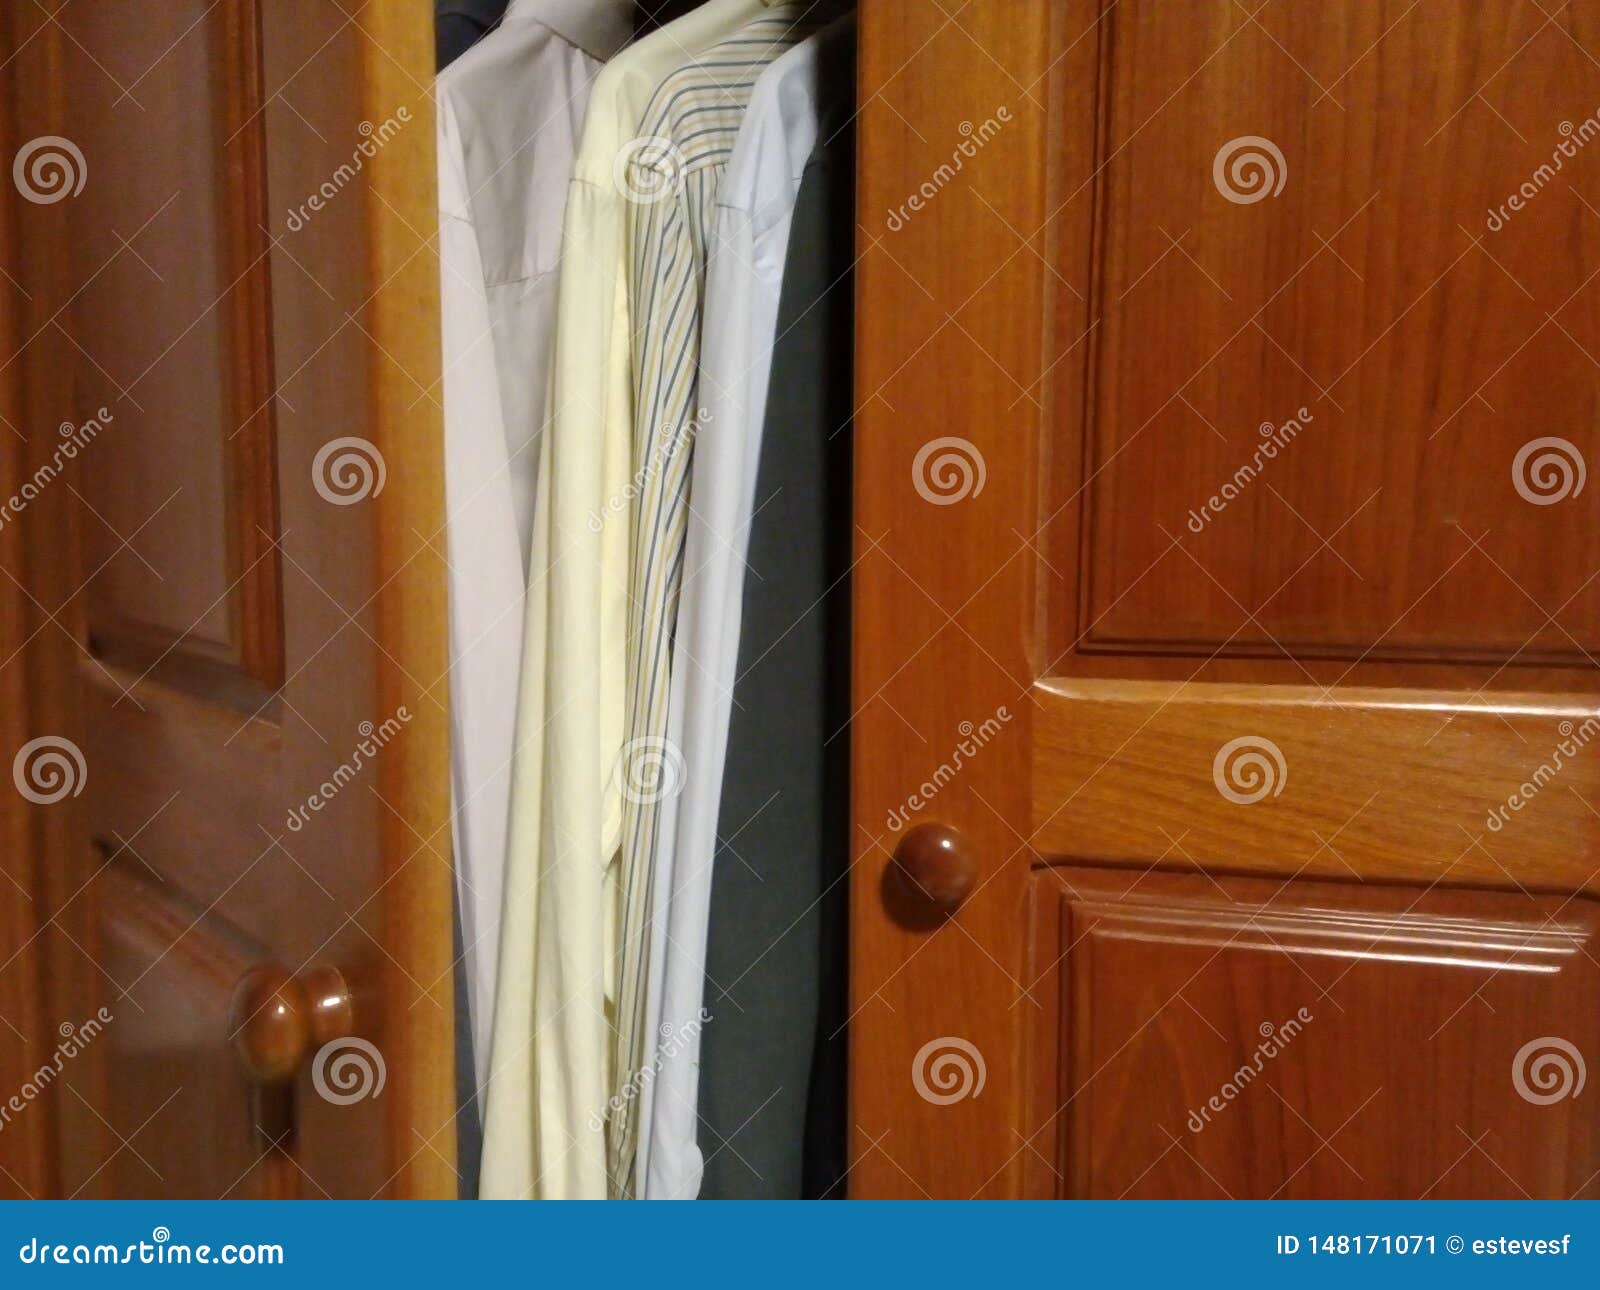 dress shirts in the wooden closet with good light